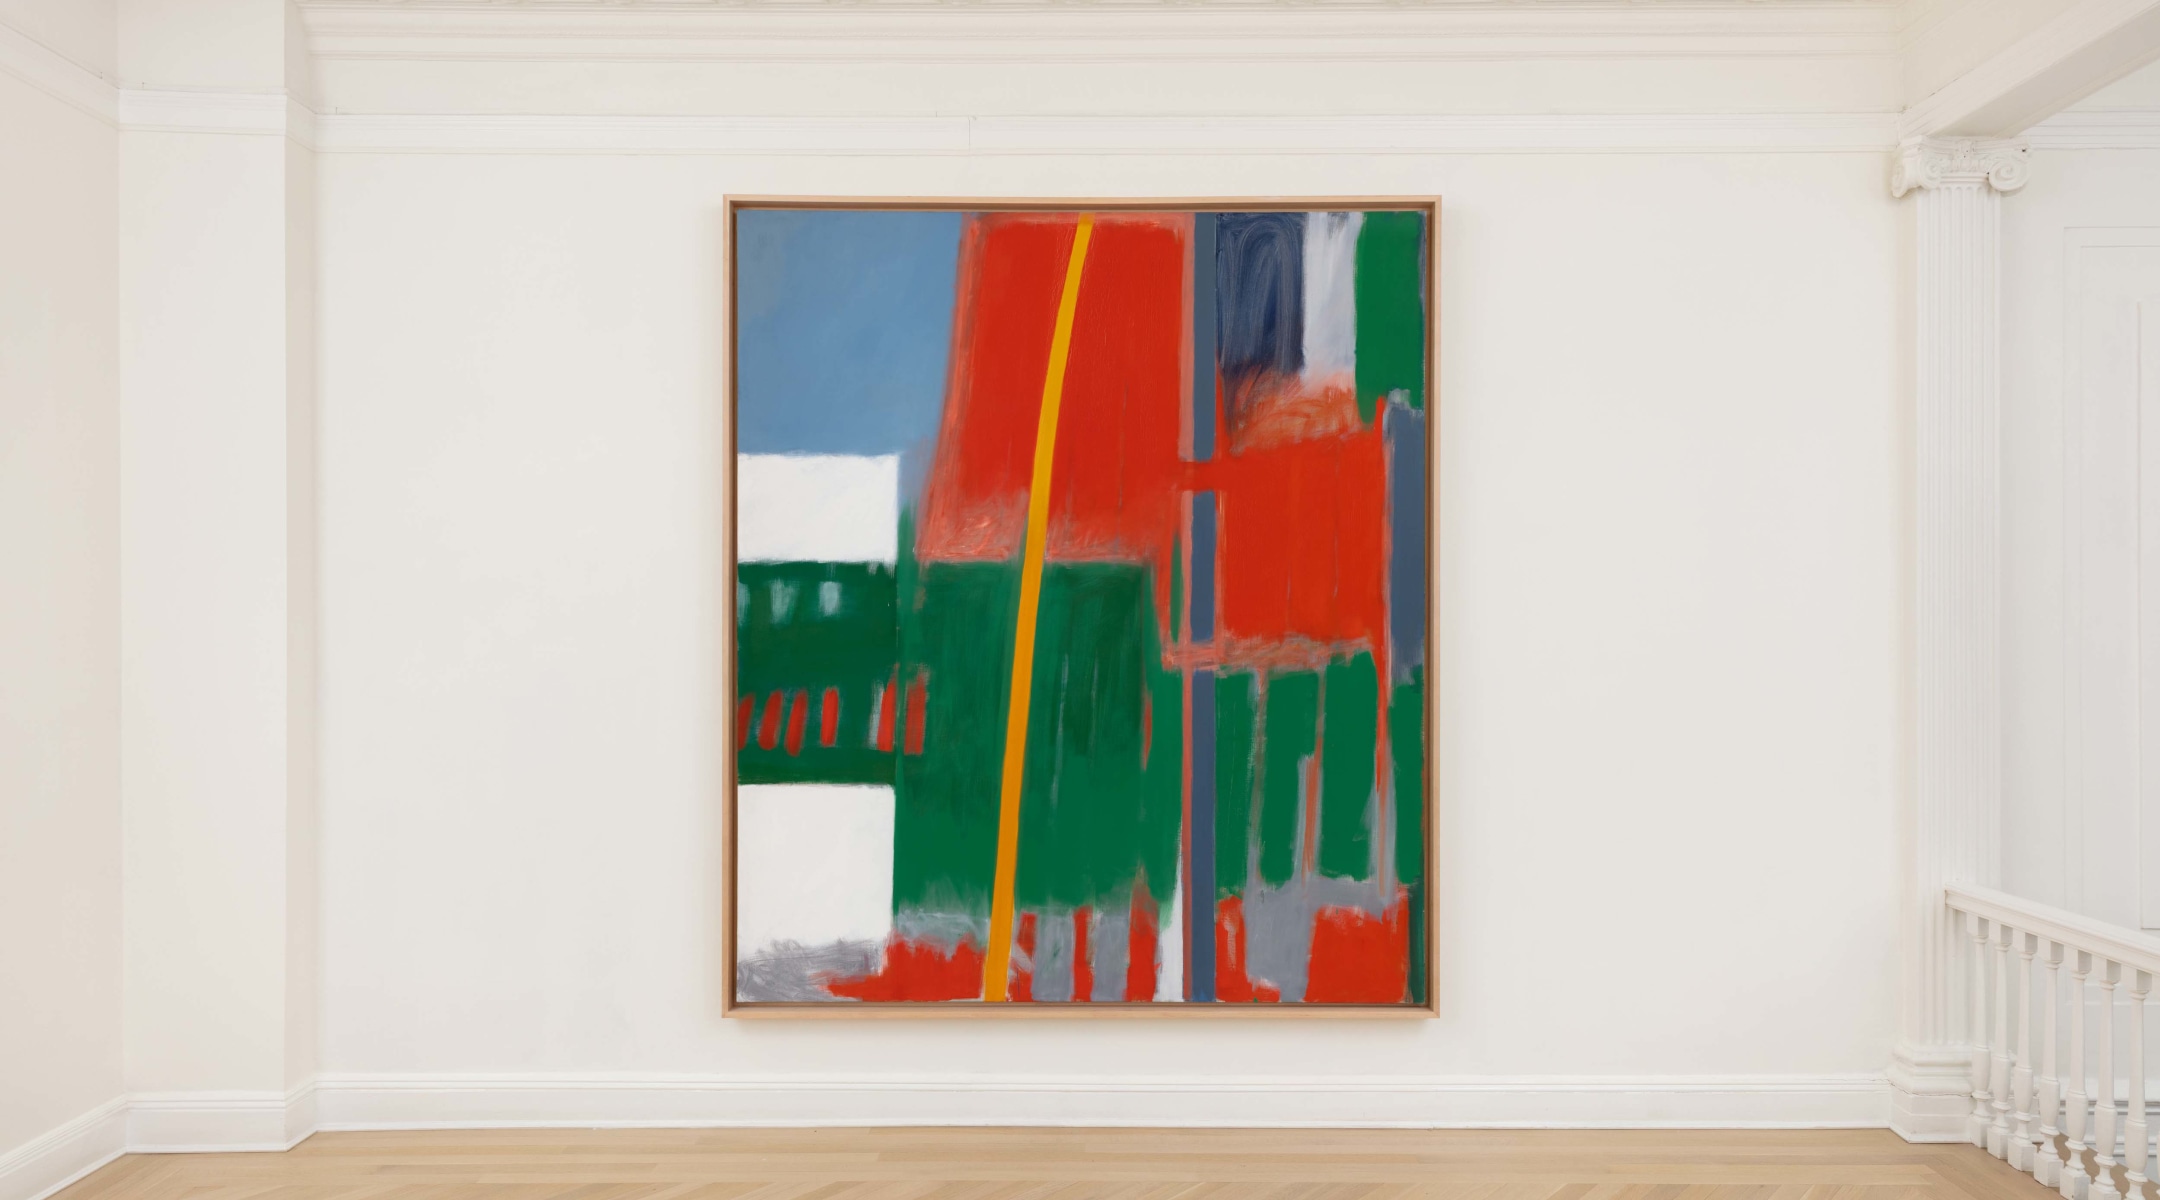 Abstract painting with red green blue yellow and white hanging in gallery lobby